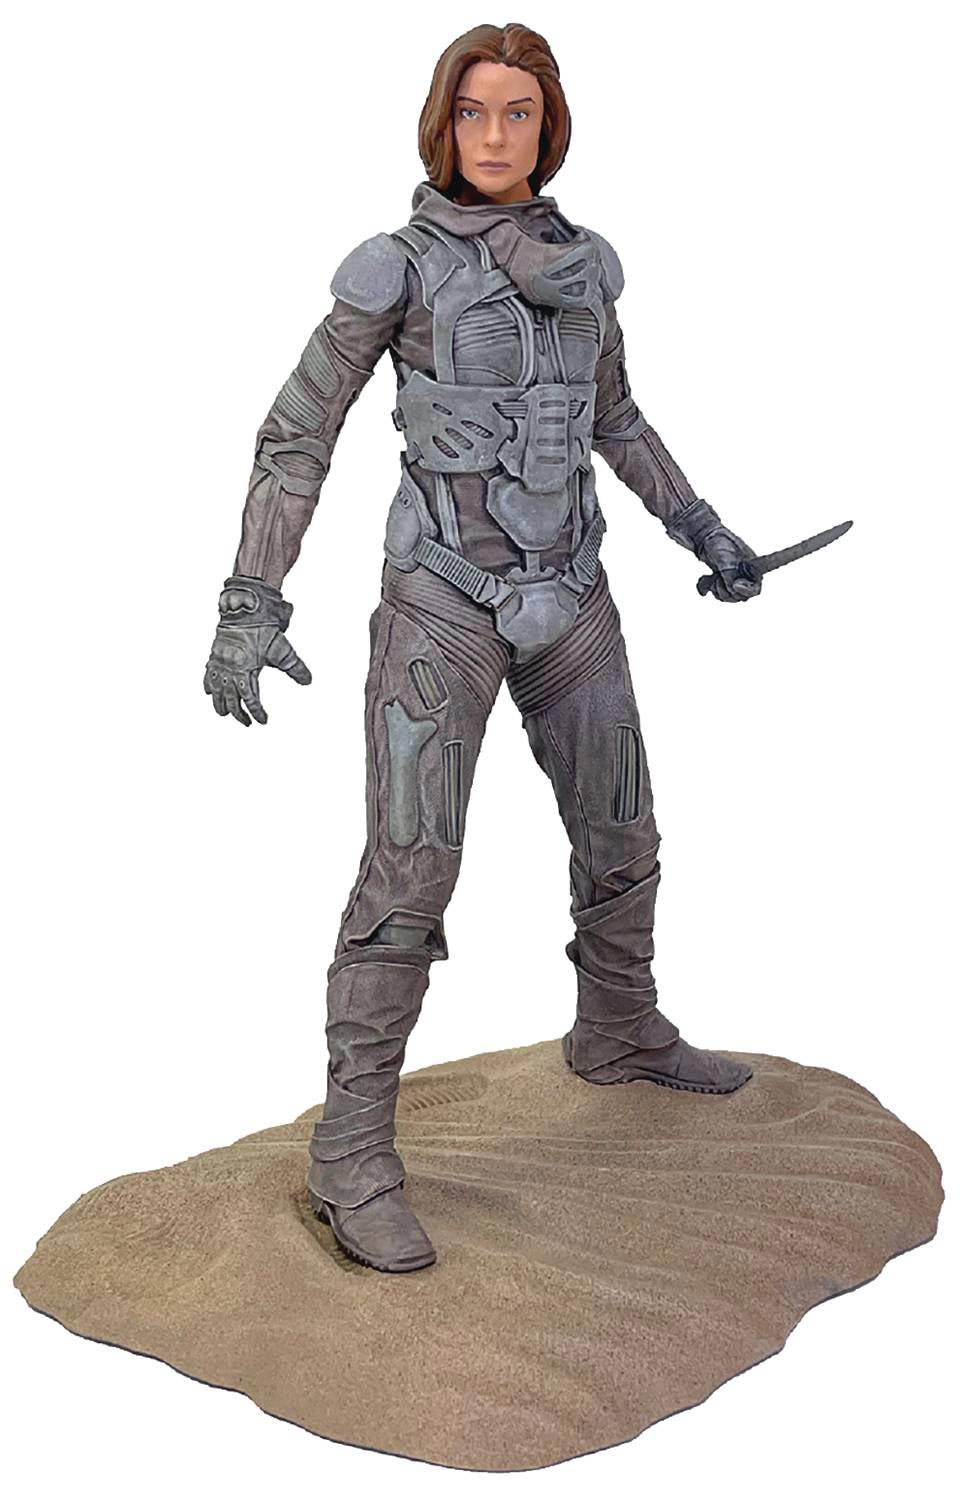 Lady Jessica figure in the likeness of Rebecca Ferguson, as she appears the Dune movie.